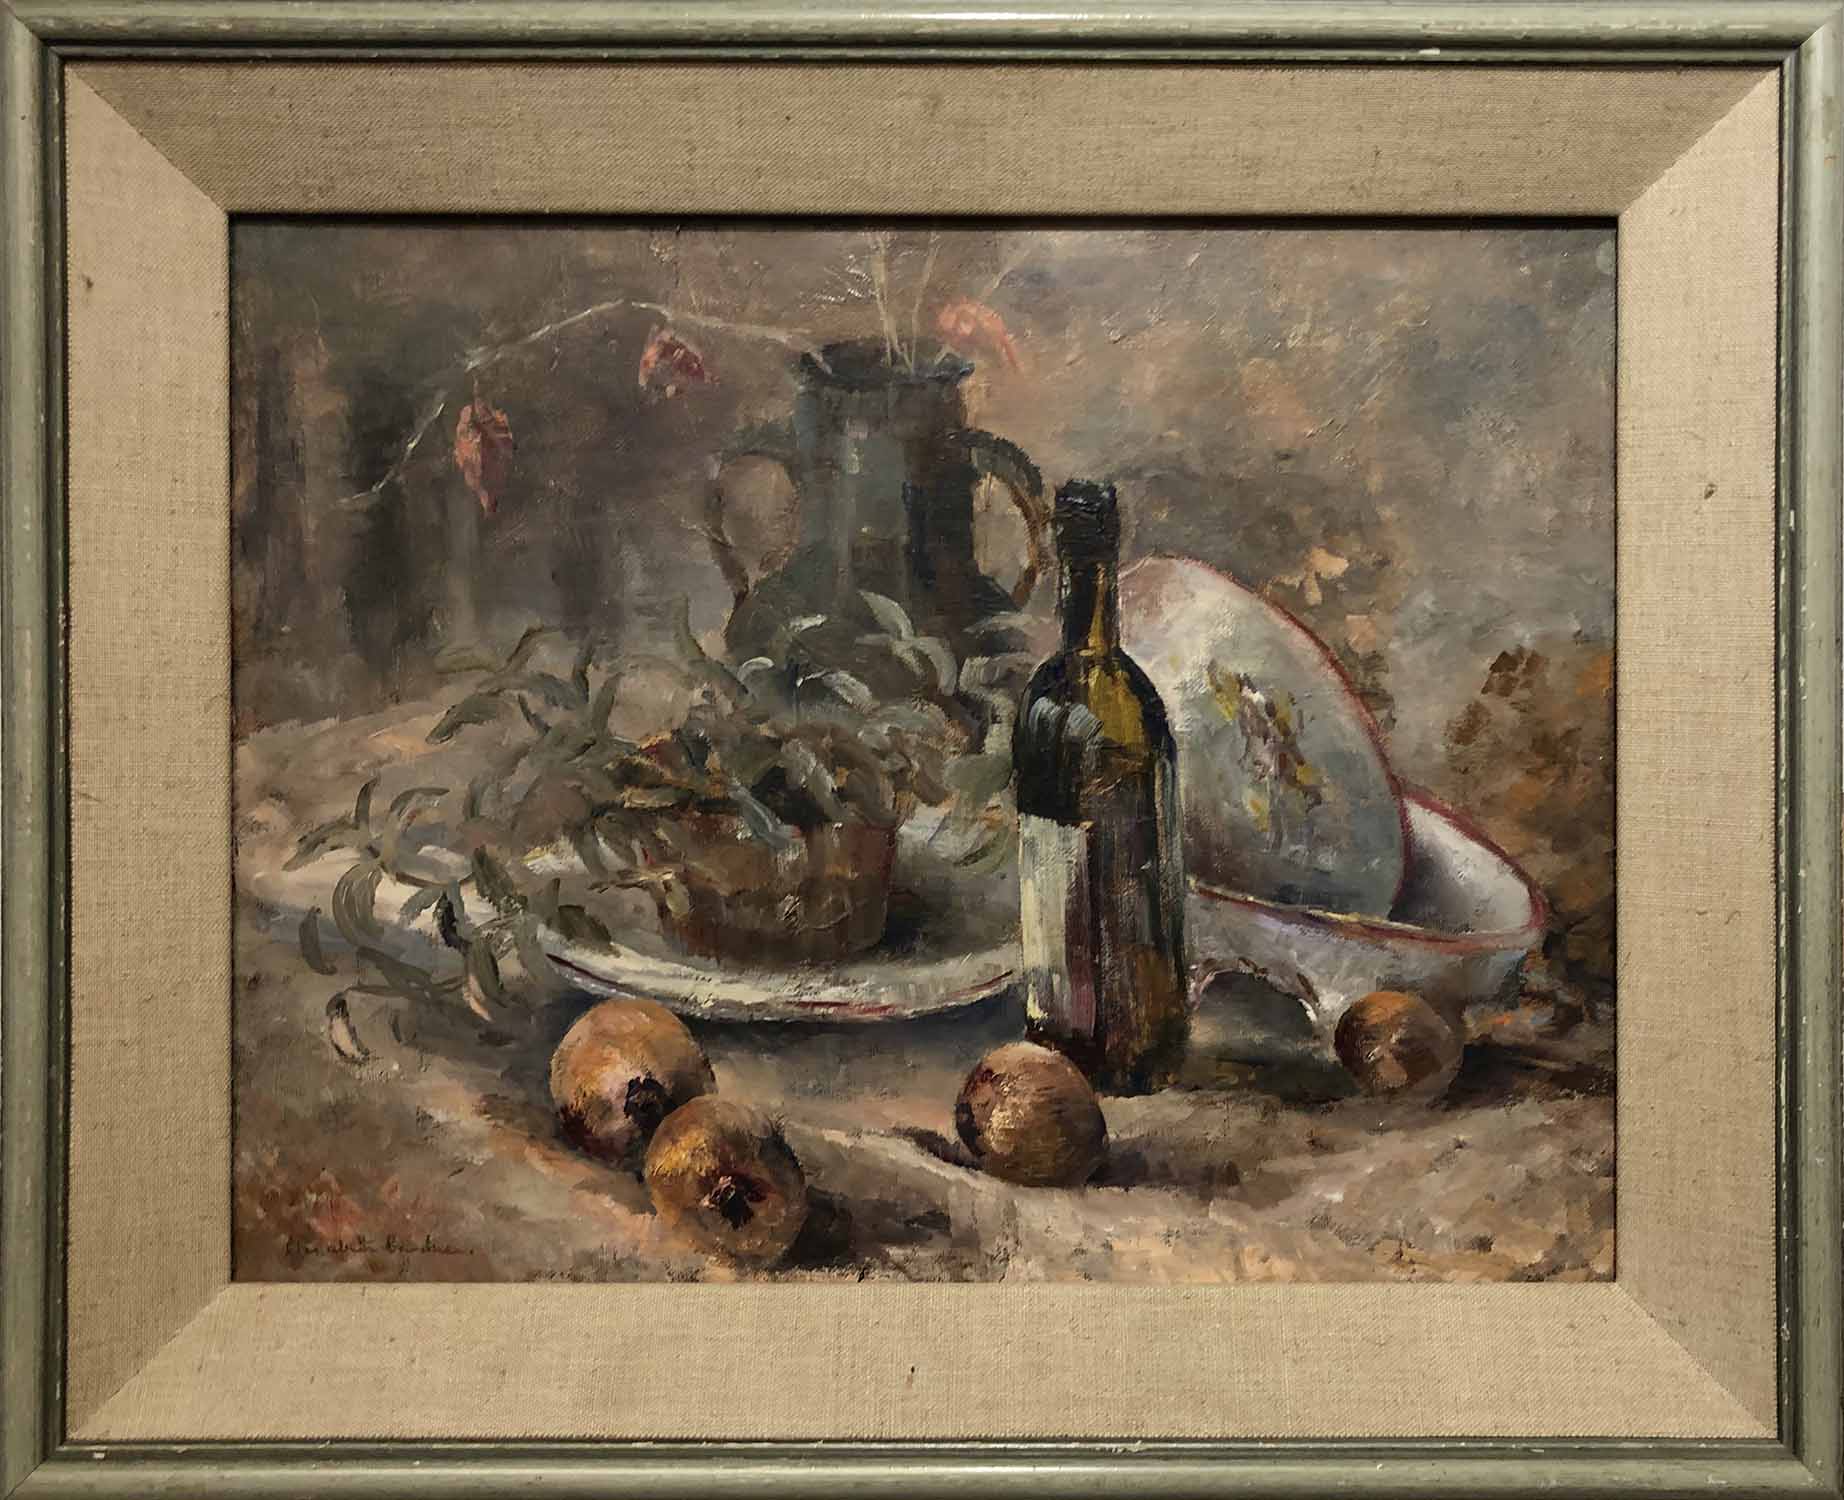 ELIZABETH GARDINER 'Still Life with Wine and Onions', oil on board, signed, 34cm x 44cm, framed.